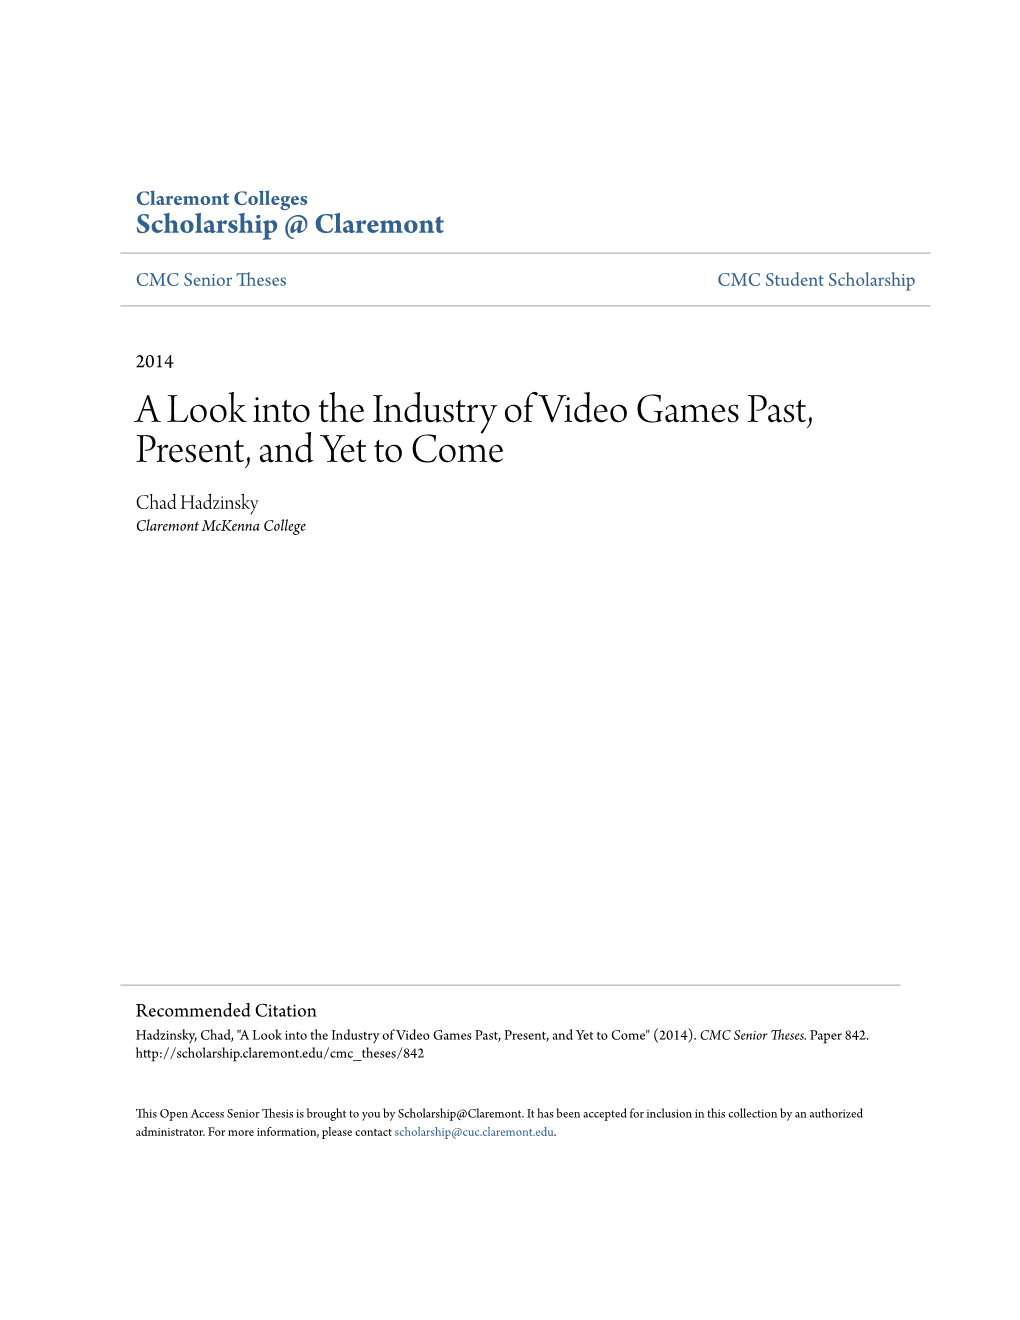 A Look Into the Industry of Video Games Past, Present, and Yet to Come Chad Hadzinsky Claremont Mckenna College